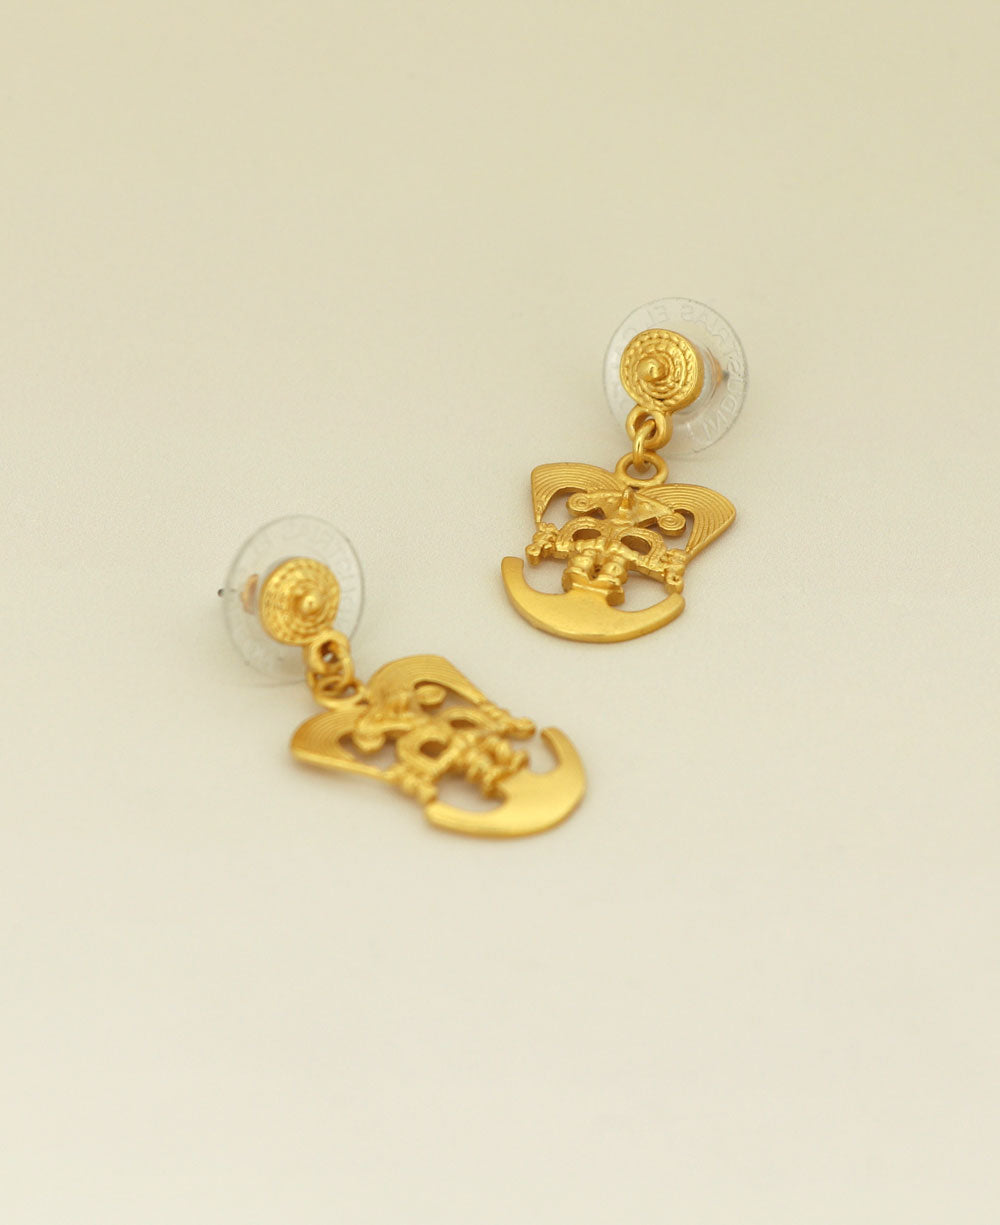 Gold Plated Cauca Symbol Earrings displayed against a neutral backdrop, emphasizing their historical design and brilliant finish